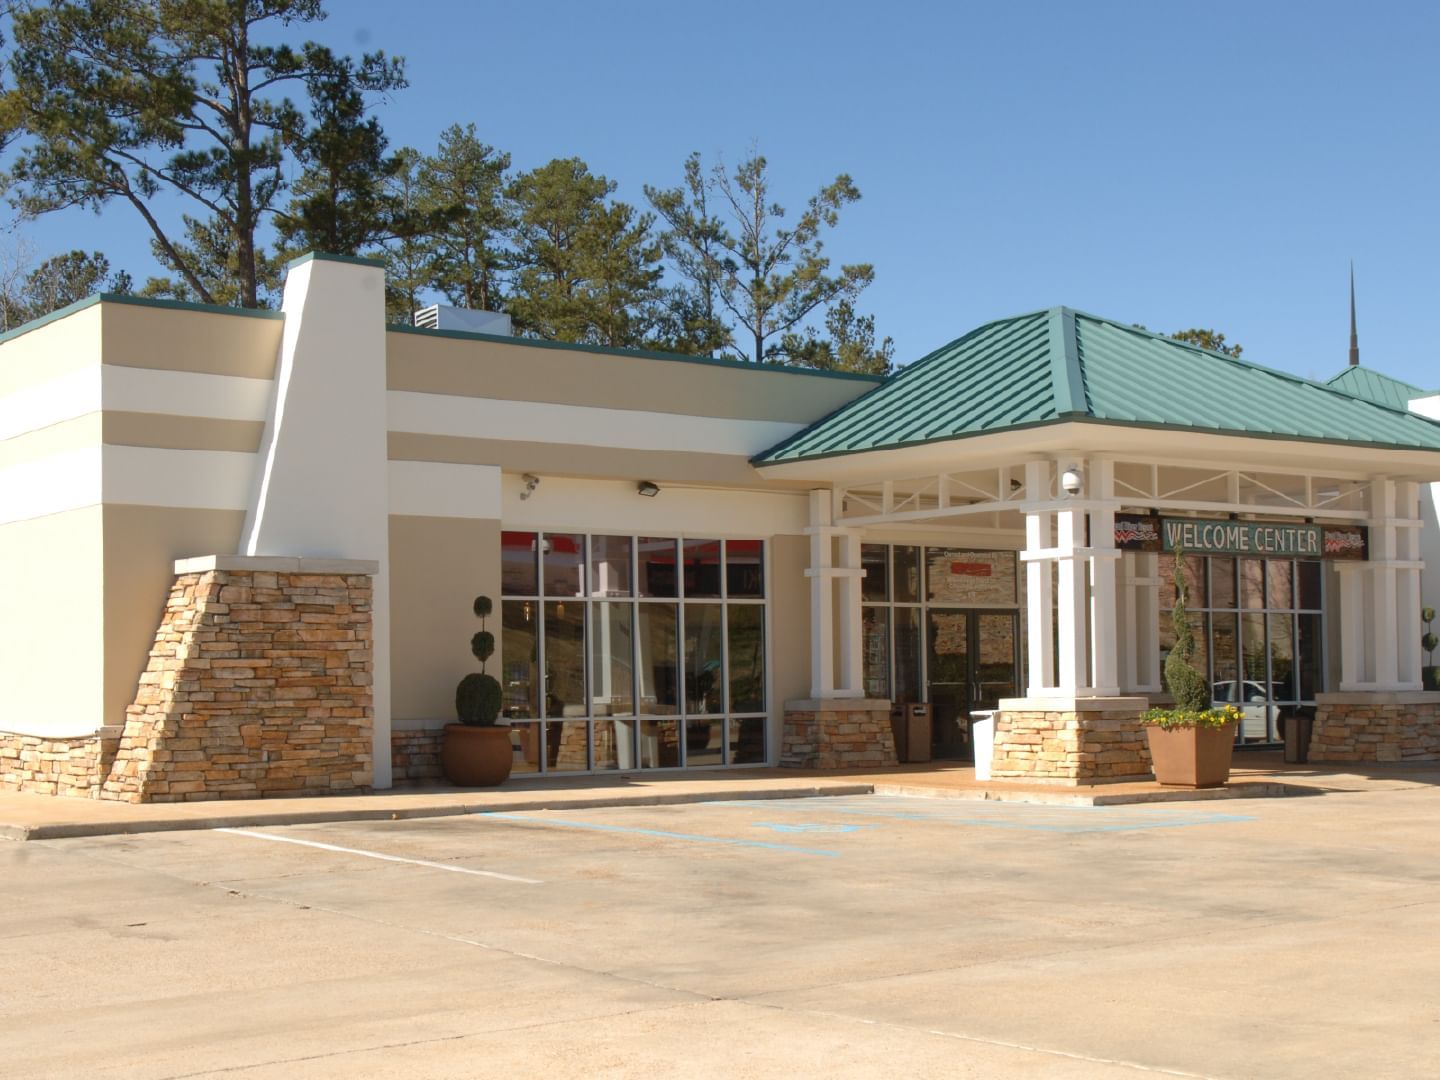 Exterior view of the welcome center at Pearl River Resorts